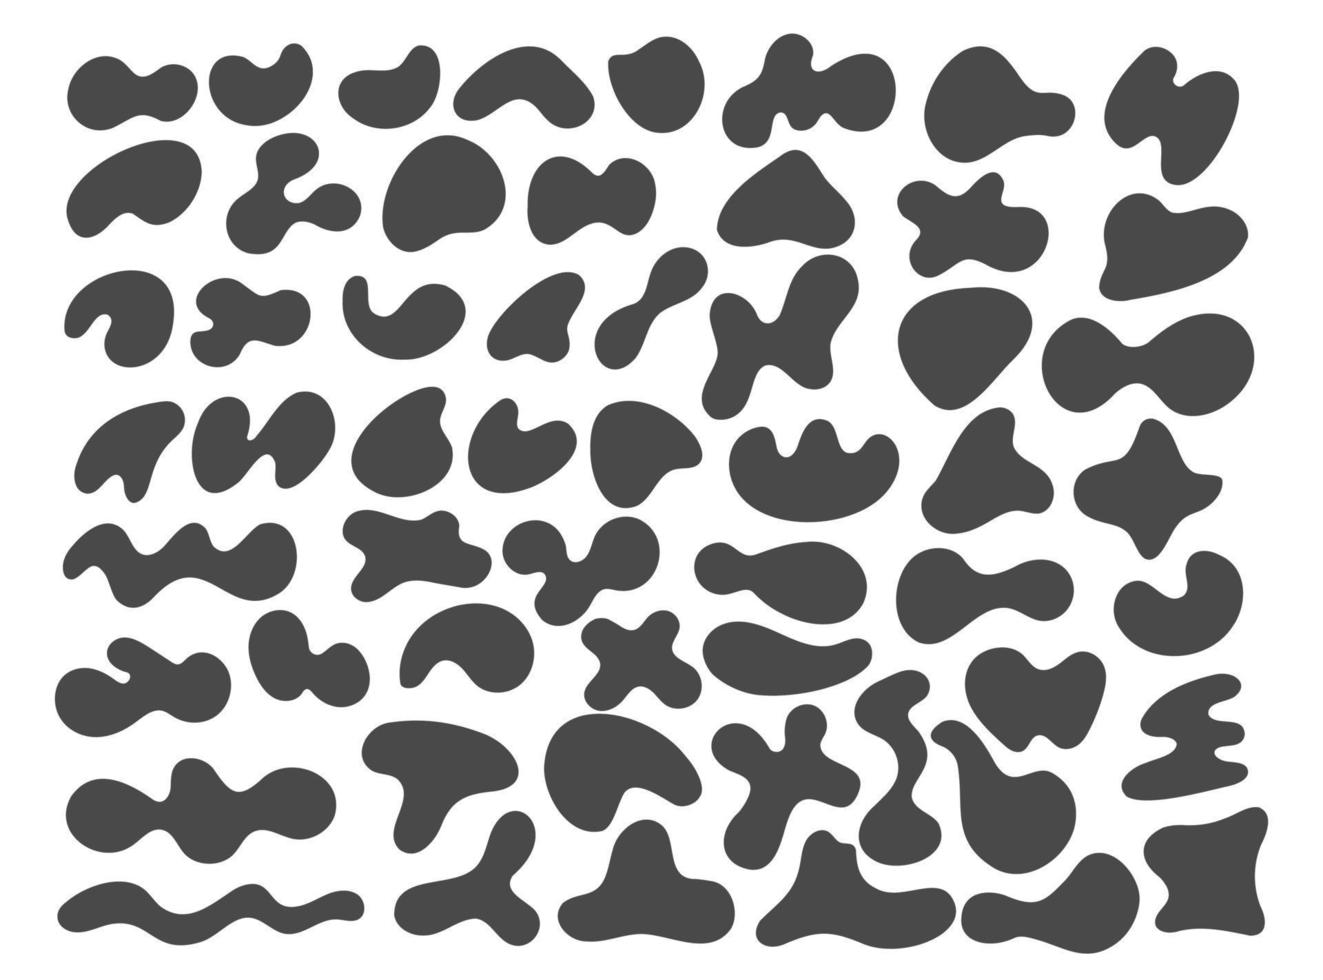 Organic abstract shapes. Liquid organic blobs. Random black simple drops. Fluid vector elements set isolated on white background